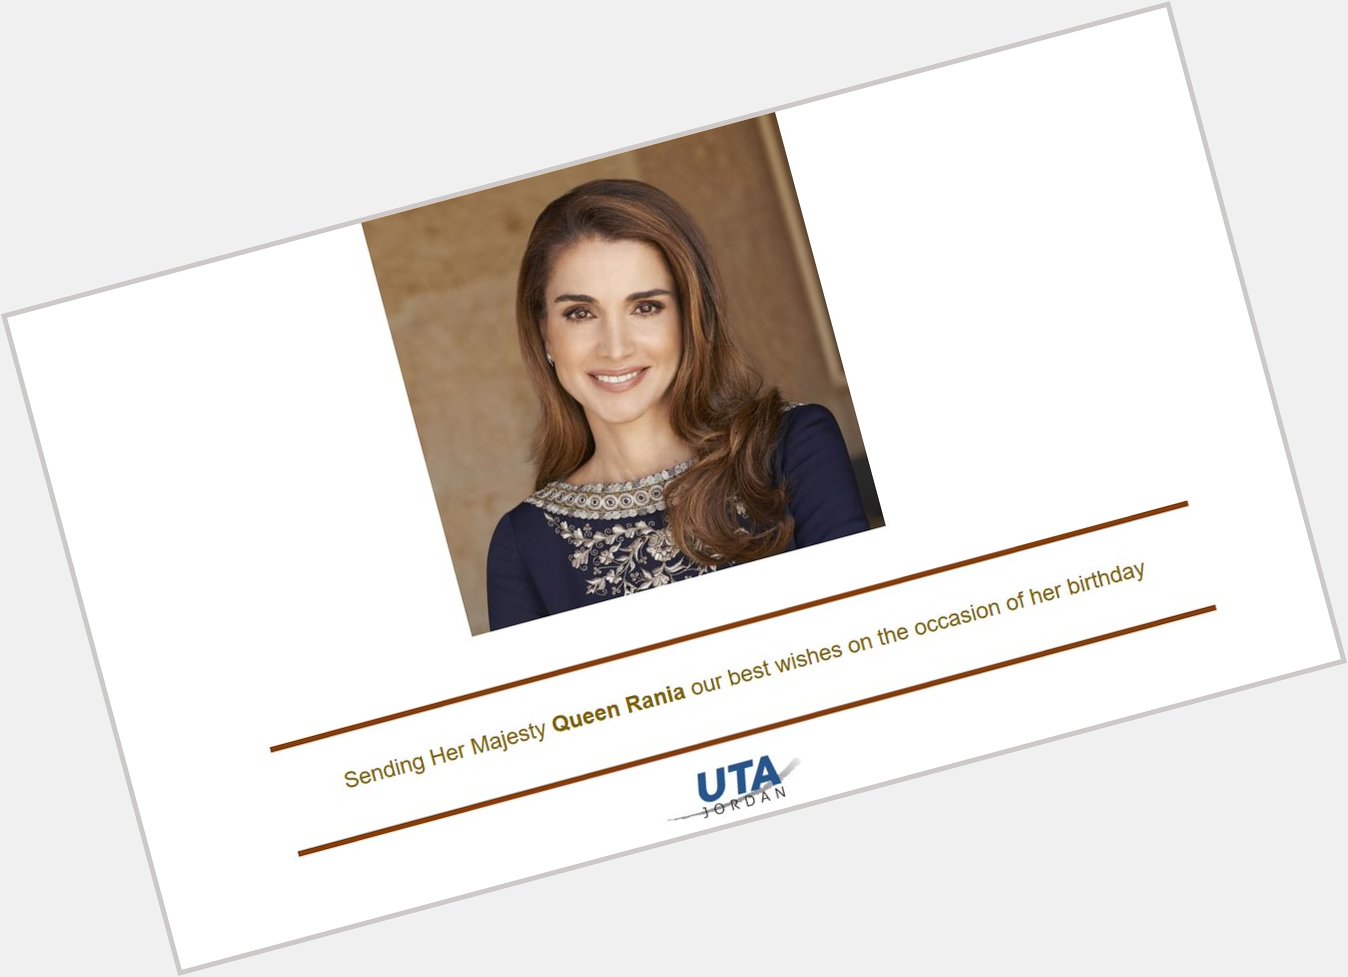 UTA Jordan wishes her Majesty Queen Rania Al Abduallah many happy returns on the occasion of her birthday. 